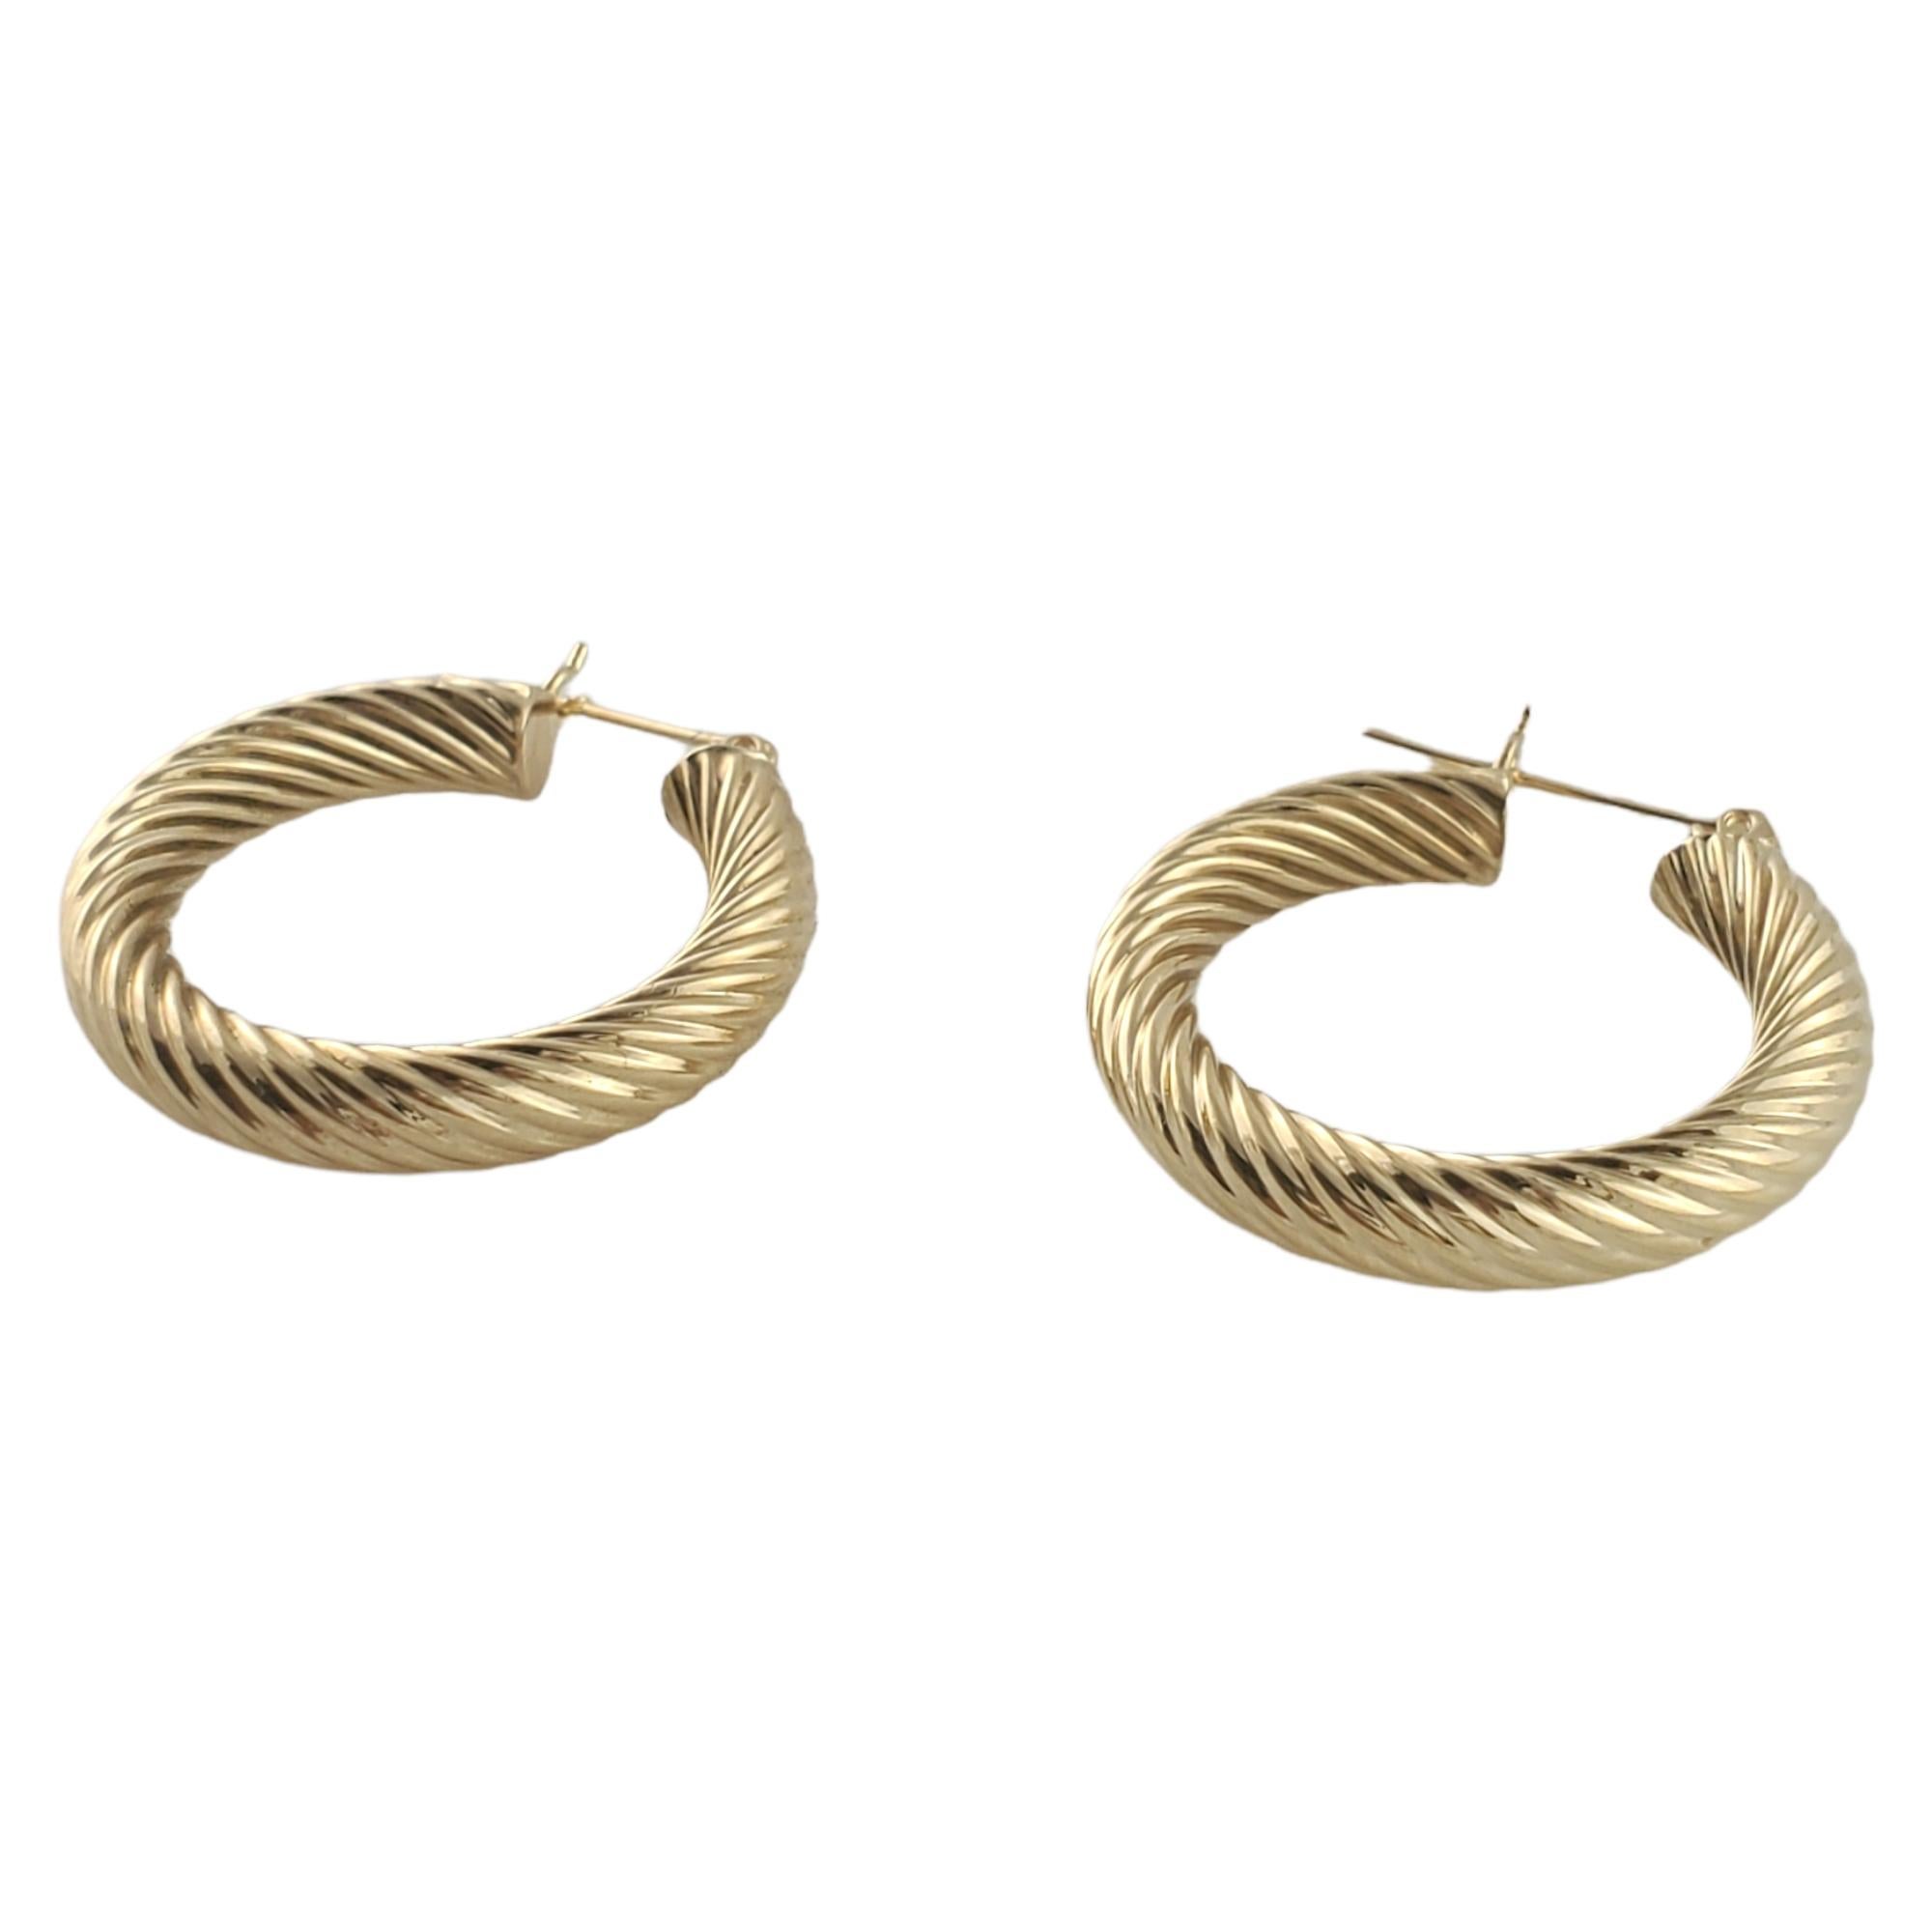 Beautiful pair of 14K gold hoops earrings with a gorgeous twist design!

Size: 23 mm X 23 mm

Weight: 2.8 g/ 1.8 dwt

Hallmark: JCM 14K

Very good condition, professionally polished.

Will come packaged in a gift box and will be shipped U.S.